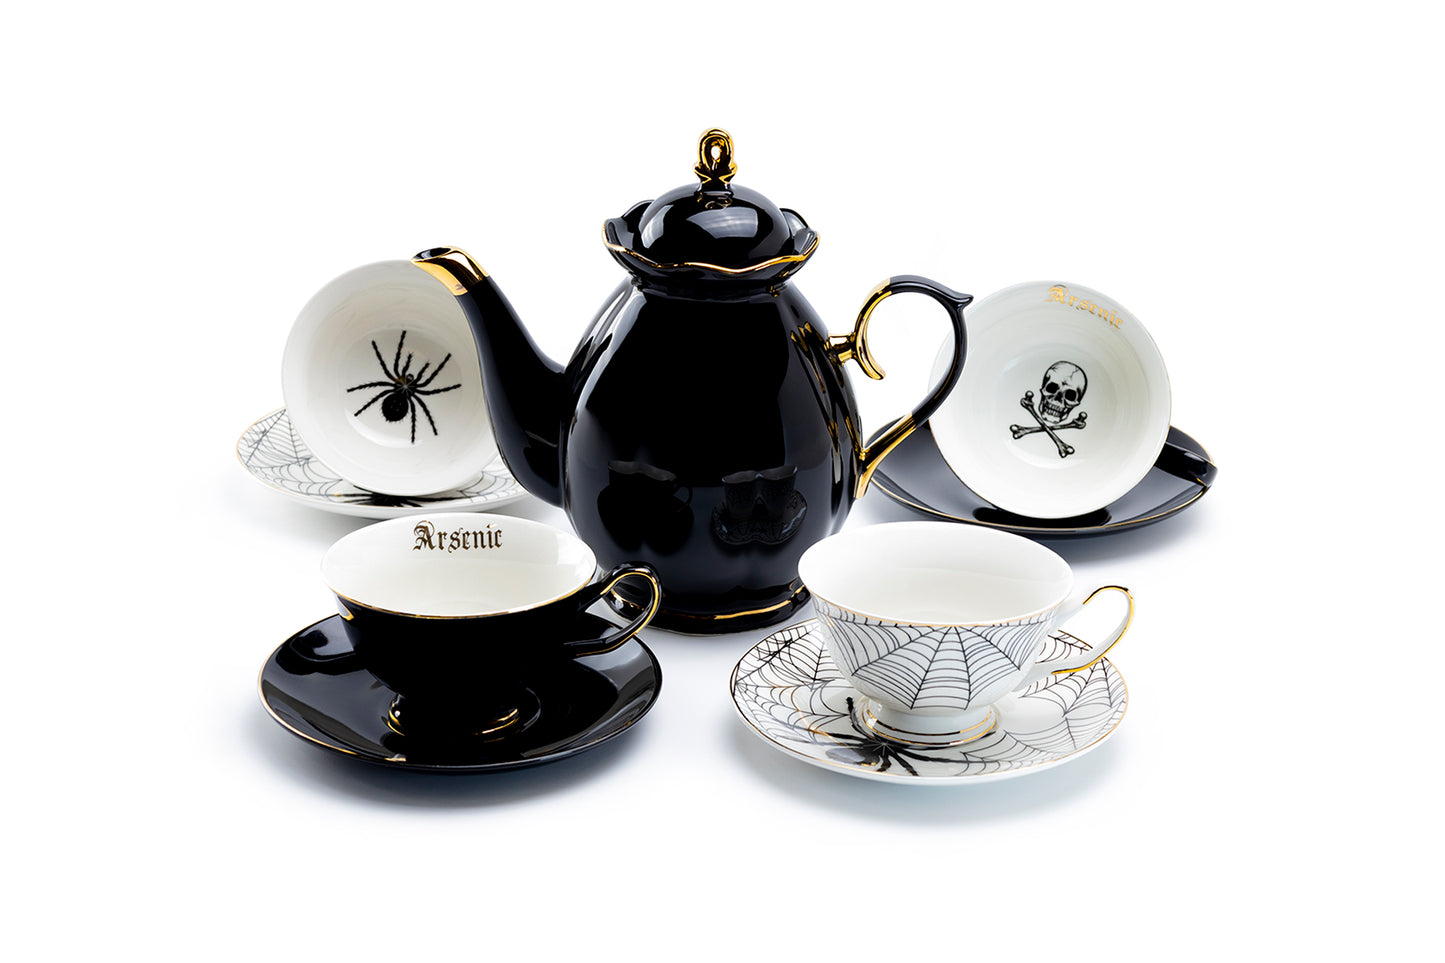 Grace Teaware Black Gold Scallop Teapot + 4 Assorted Halloween Tea Cup and Saucer Sets - Arsenic Skull & Spider